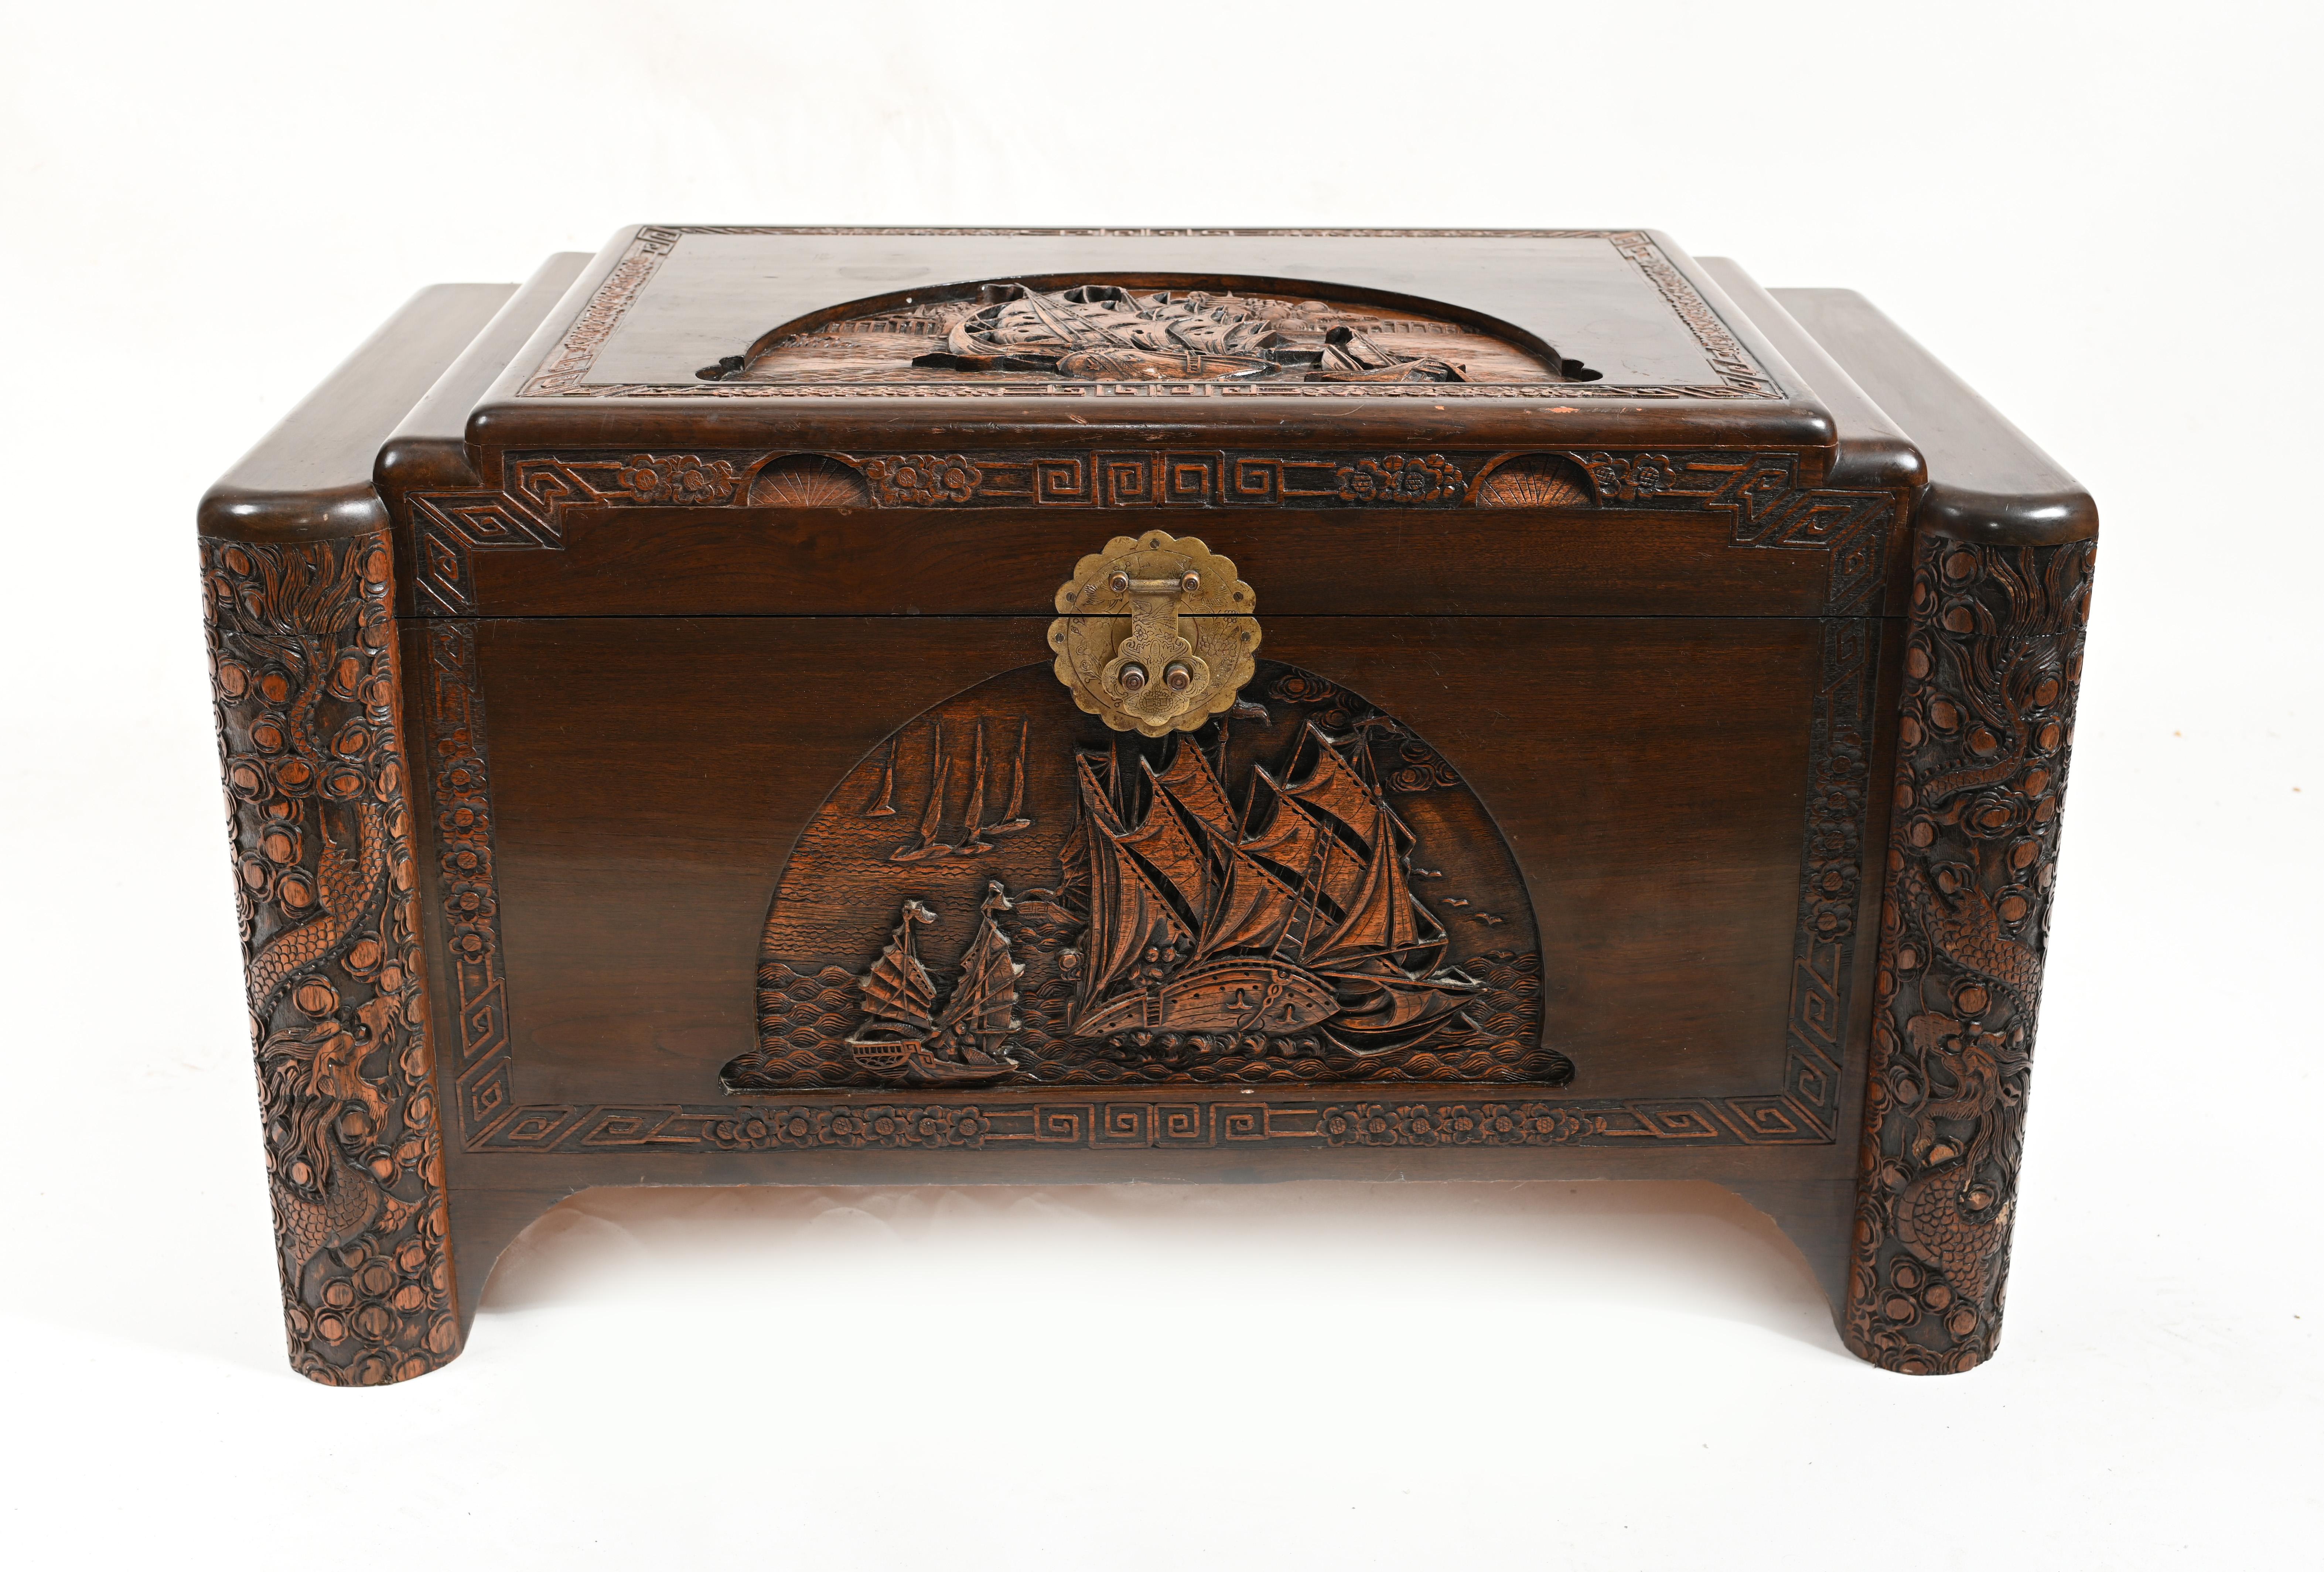 Chinese camphor wood chest finely carved with sailing ships around Hong Kong harbour
Very intricately carved details showing the junk ships 
Would have perhaps functioned as a marriage or dowry chest
 
Offered in great shape ready for home use